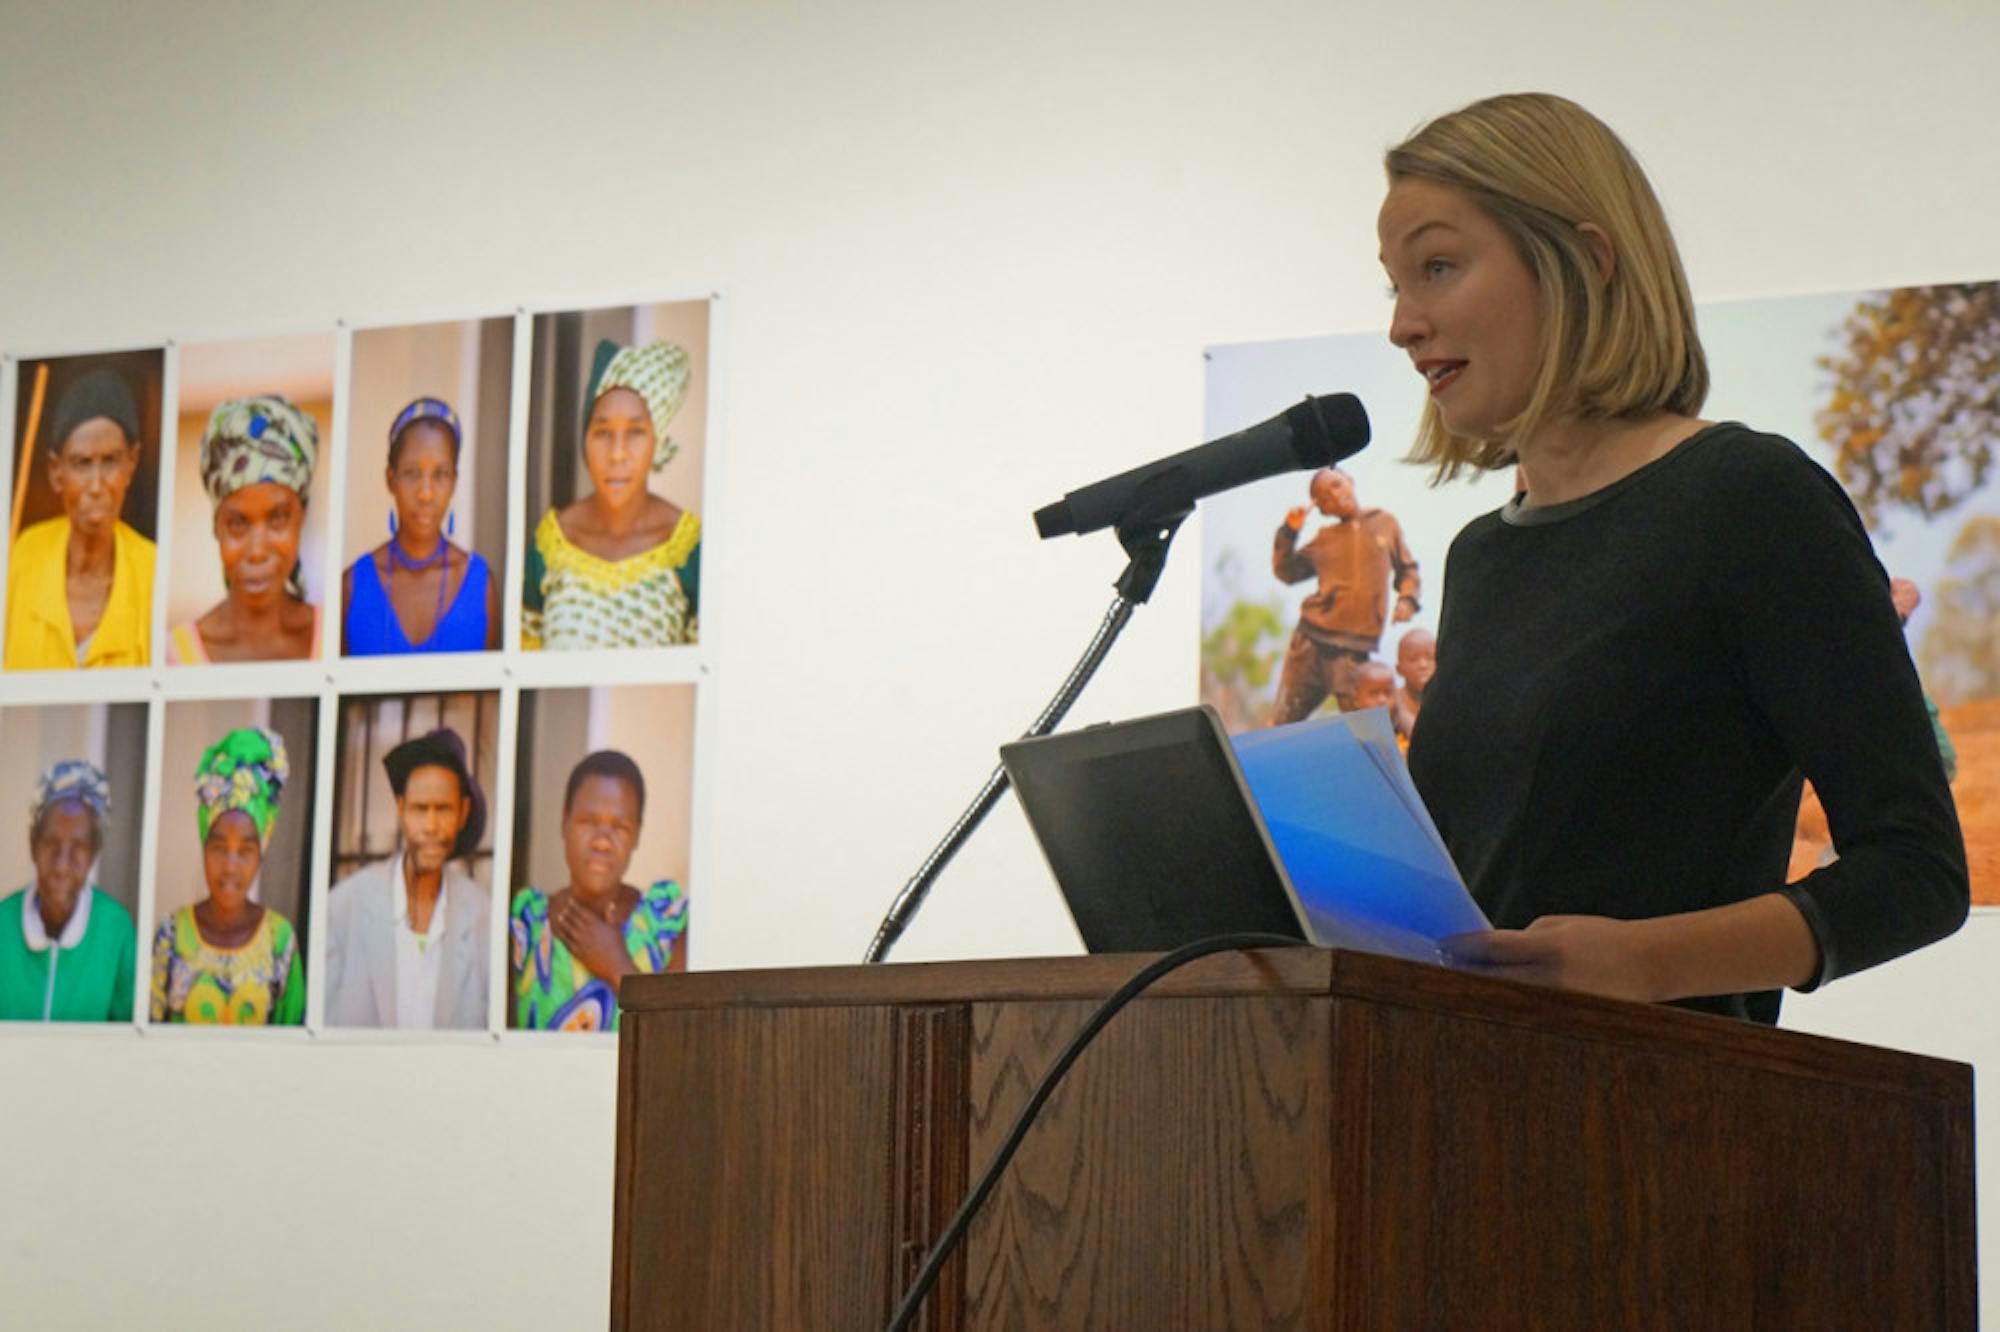 Saint Mary's alumna Malea Schulte '14 delivers presentation Monday evening on her experience in Rwanda working with both victims and perpetrators of the Rwandan genocide.